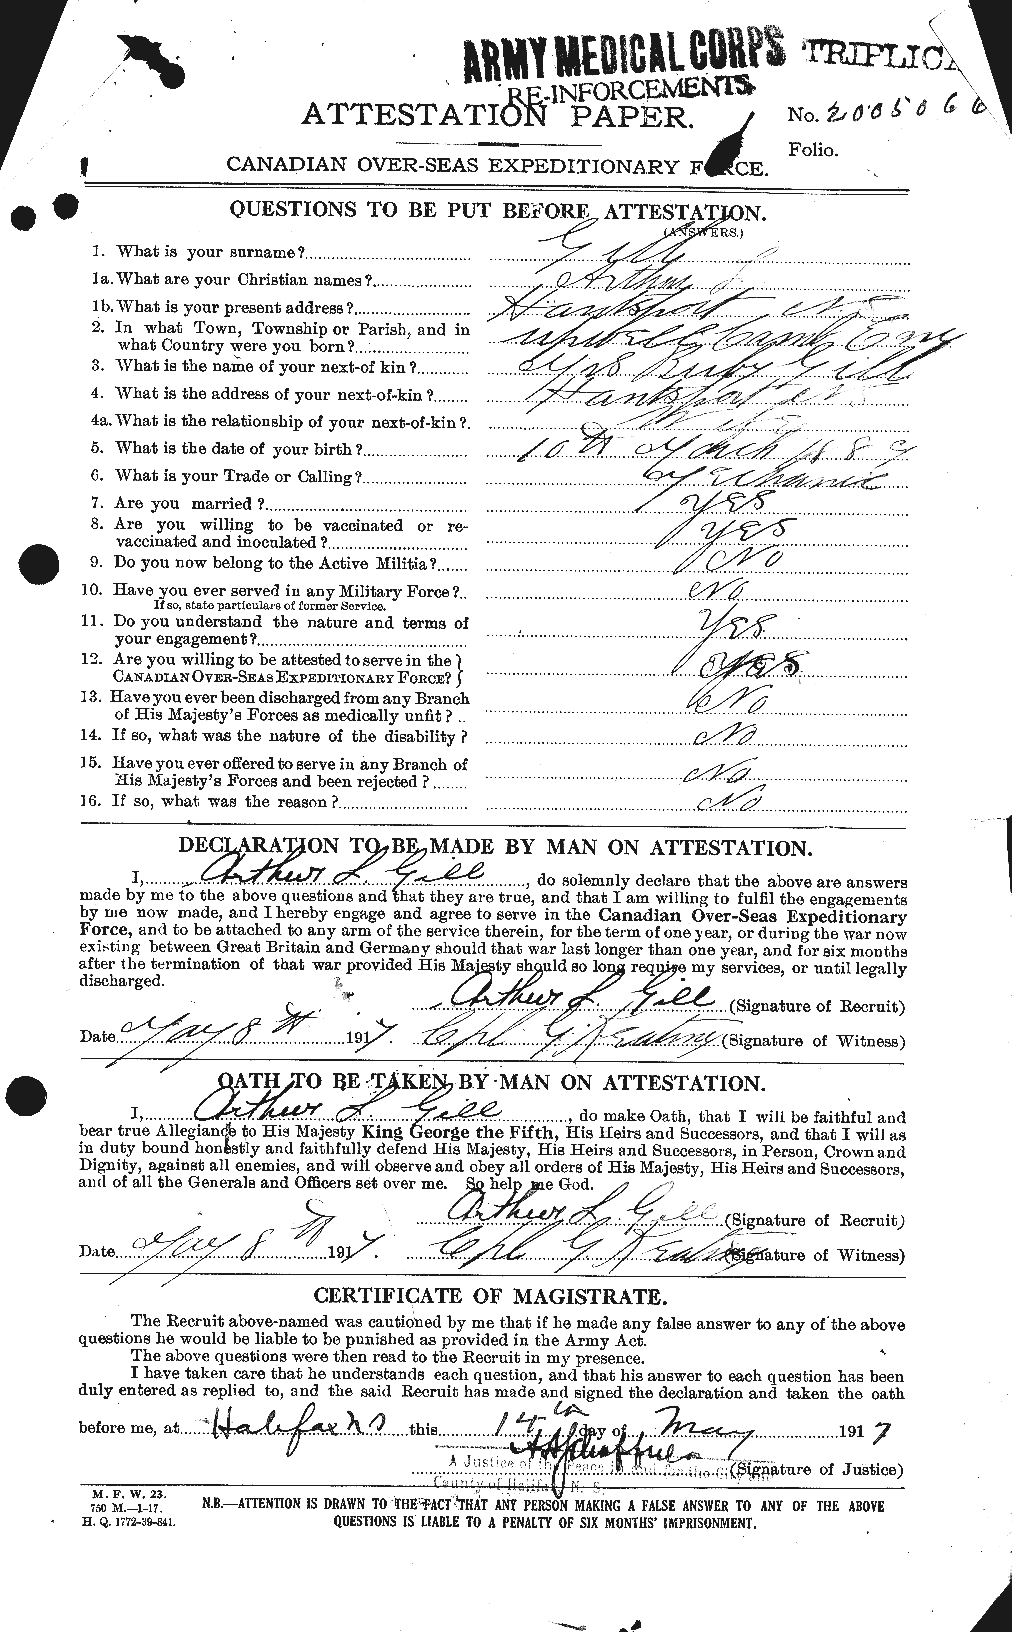 Personnel Records of the First World War - CEF 349276a